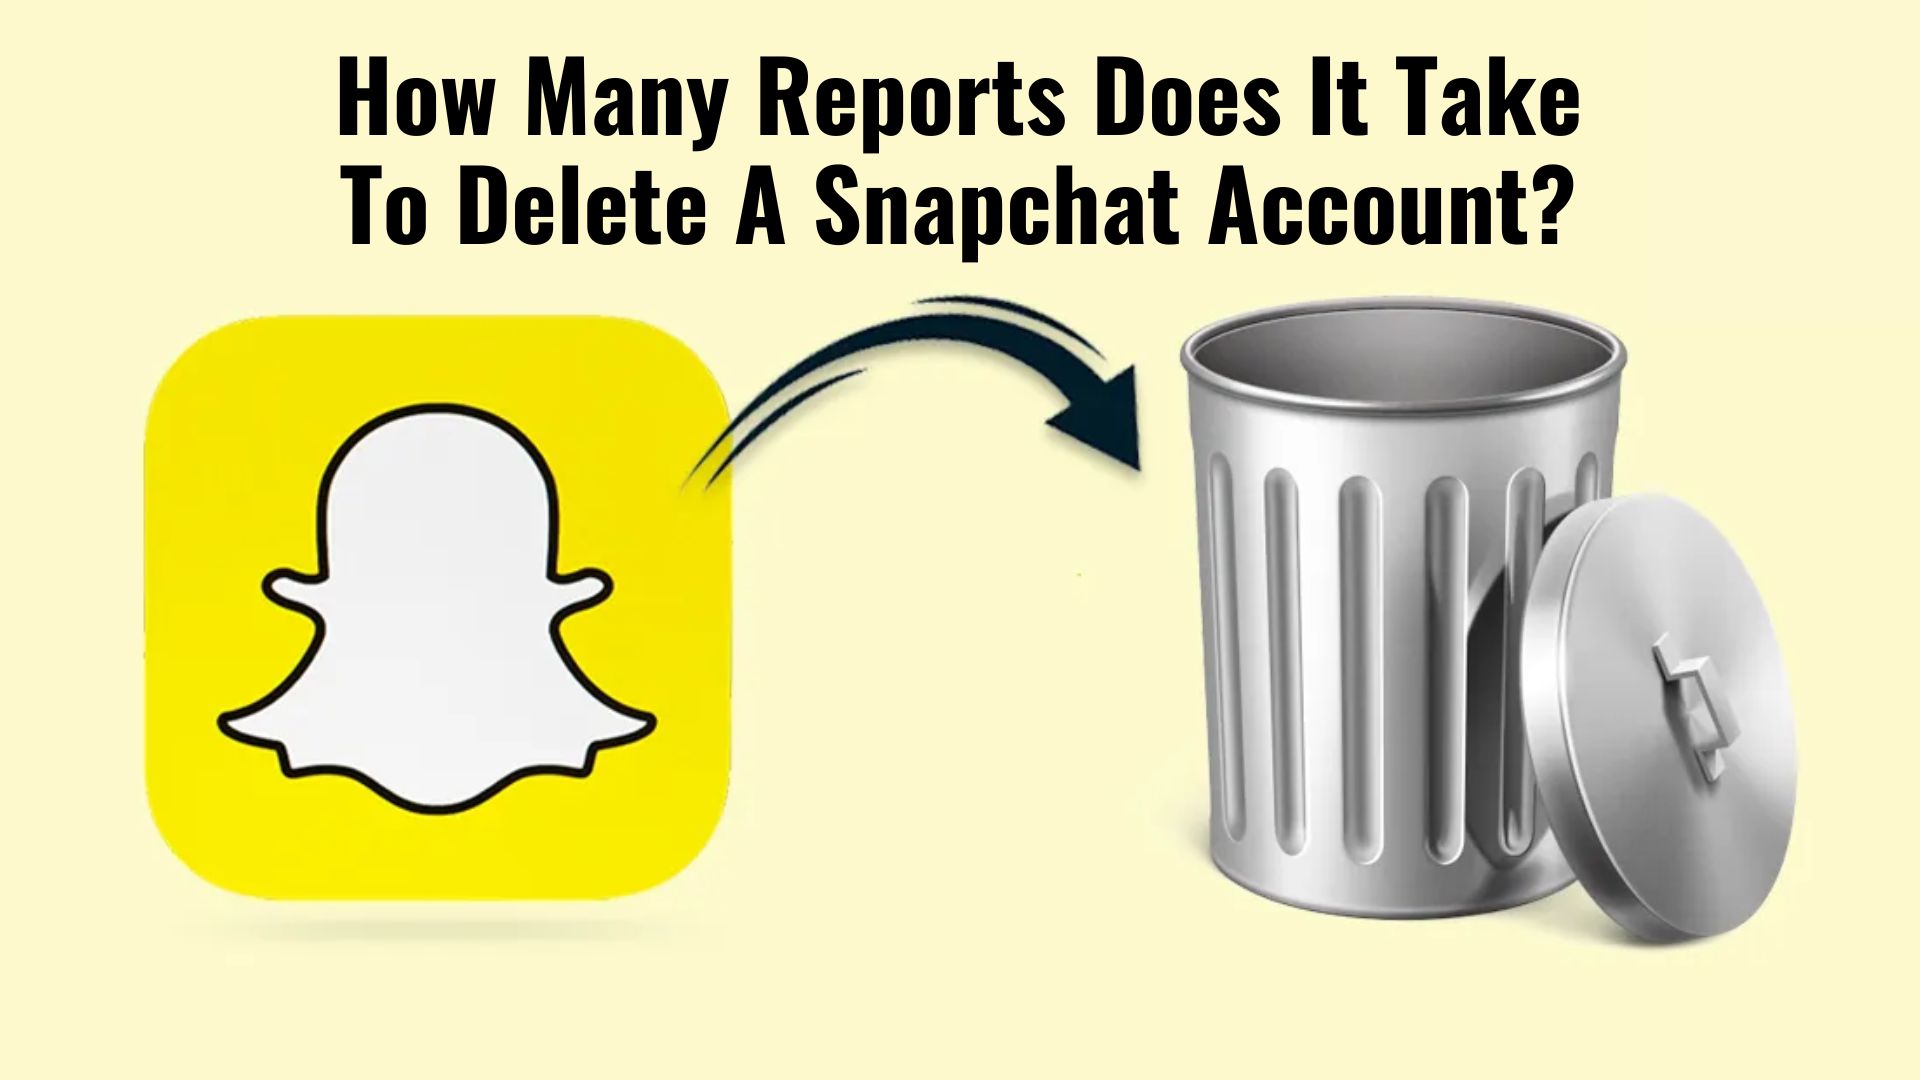 How Many Reports Does It Take To Delete A Snapchat Account?